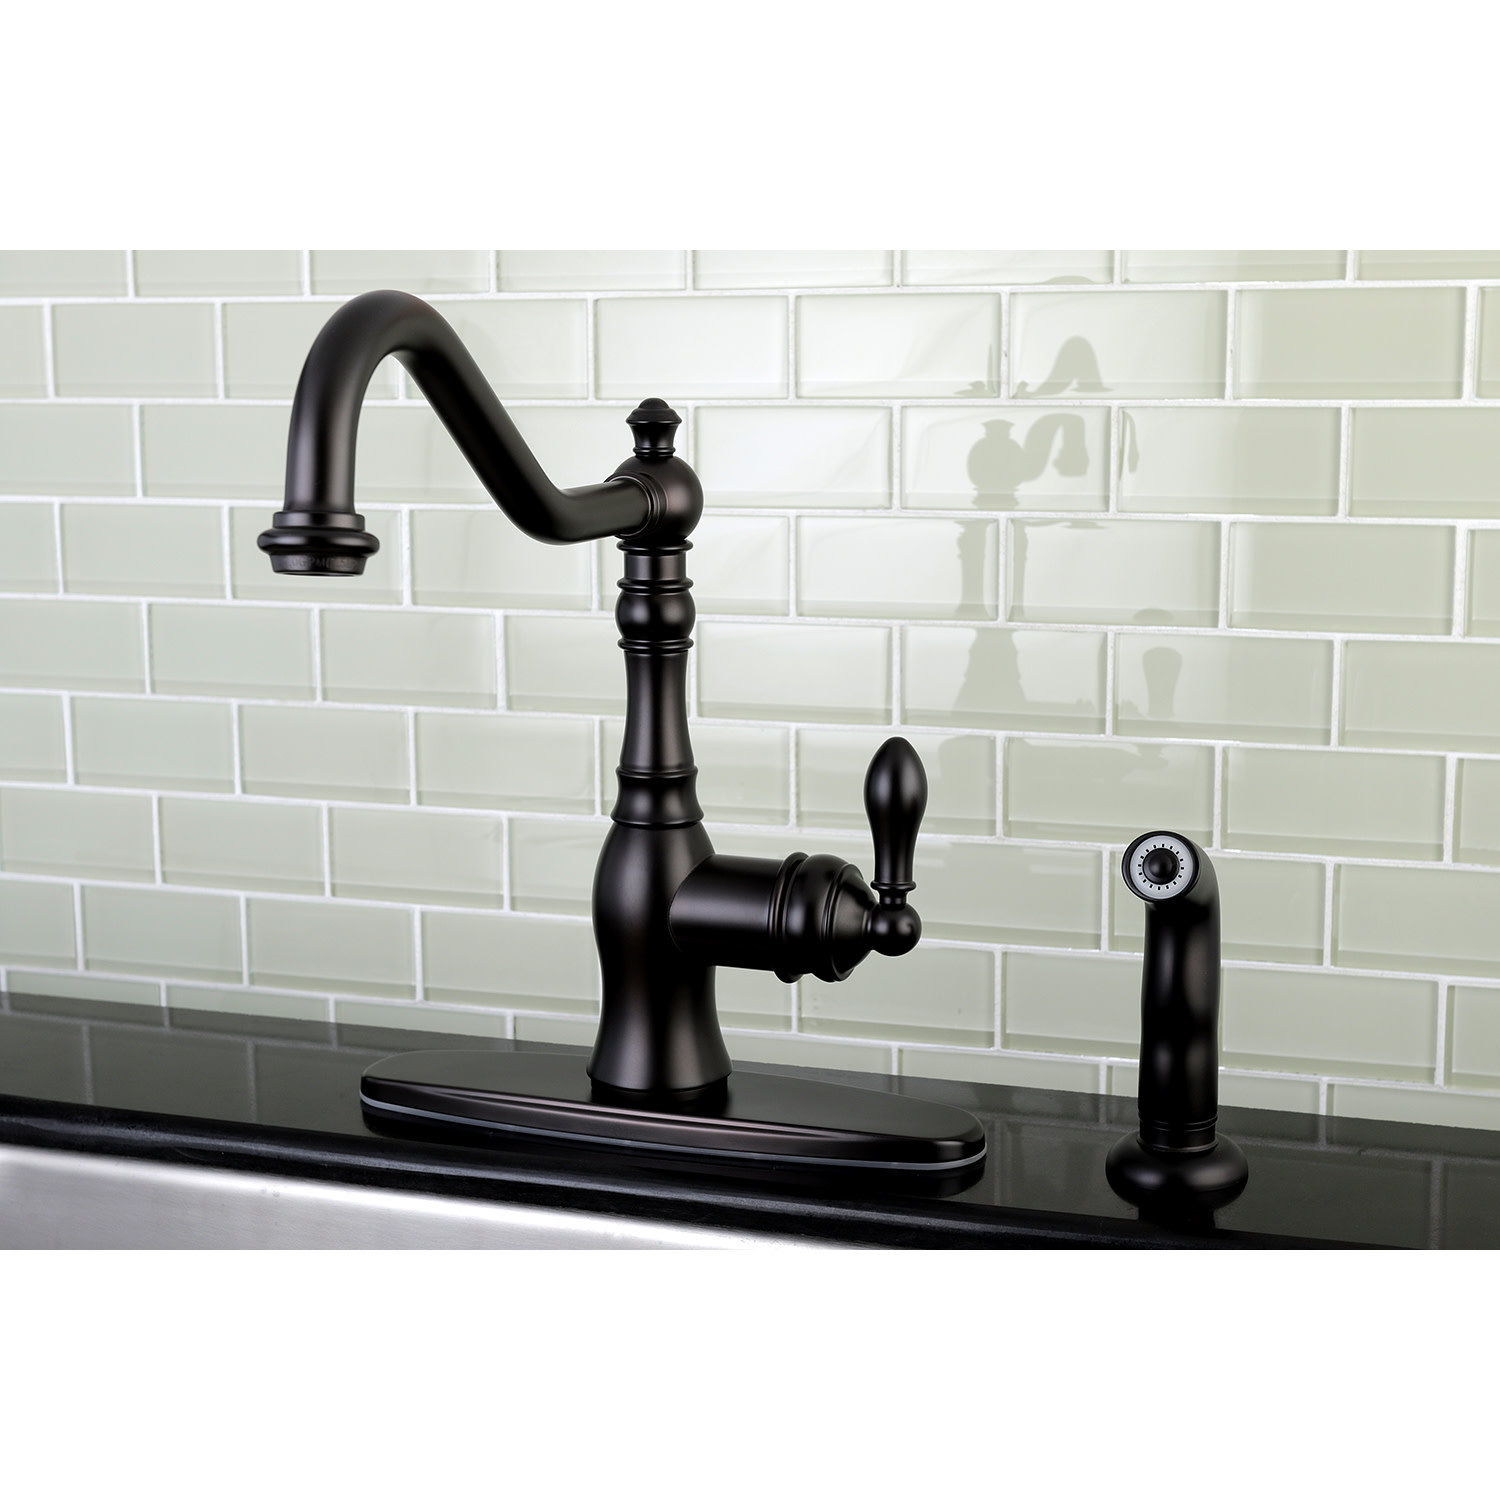 Gourmetier GSY7705ACLSP American Classic Single-Handle Kitchen Faucet with Brass Sprayer, Oil Rubbed Bronze - image 2 of 5